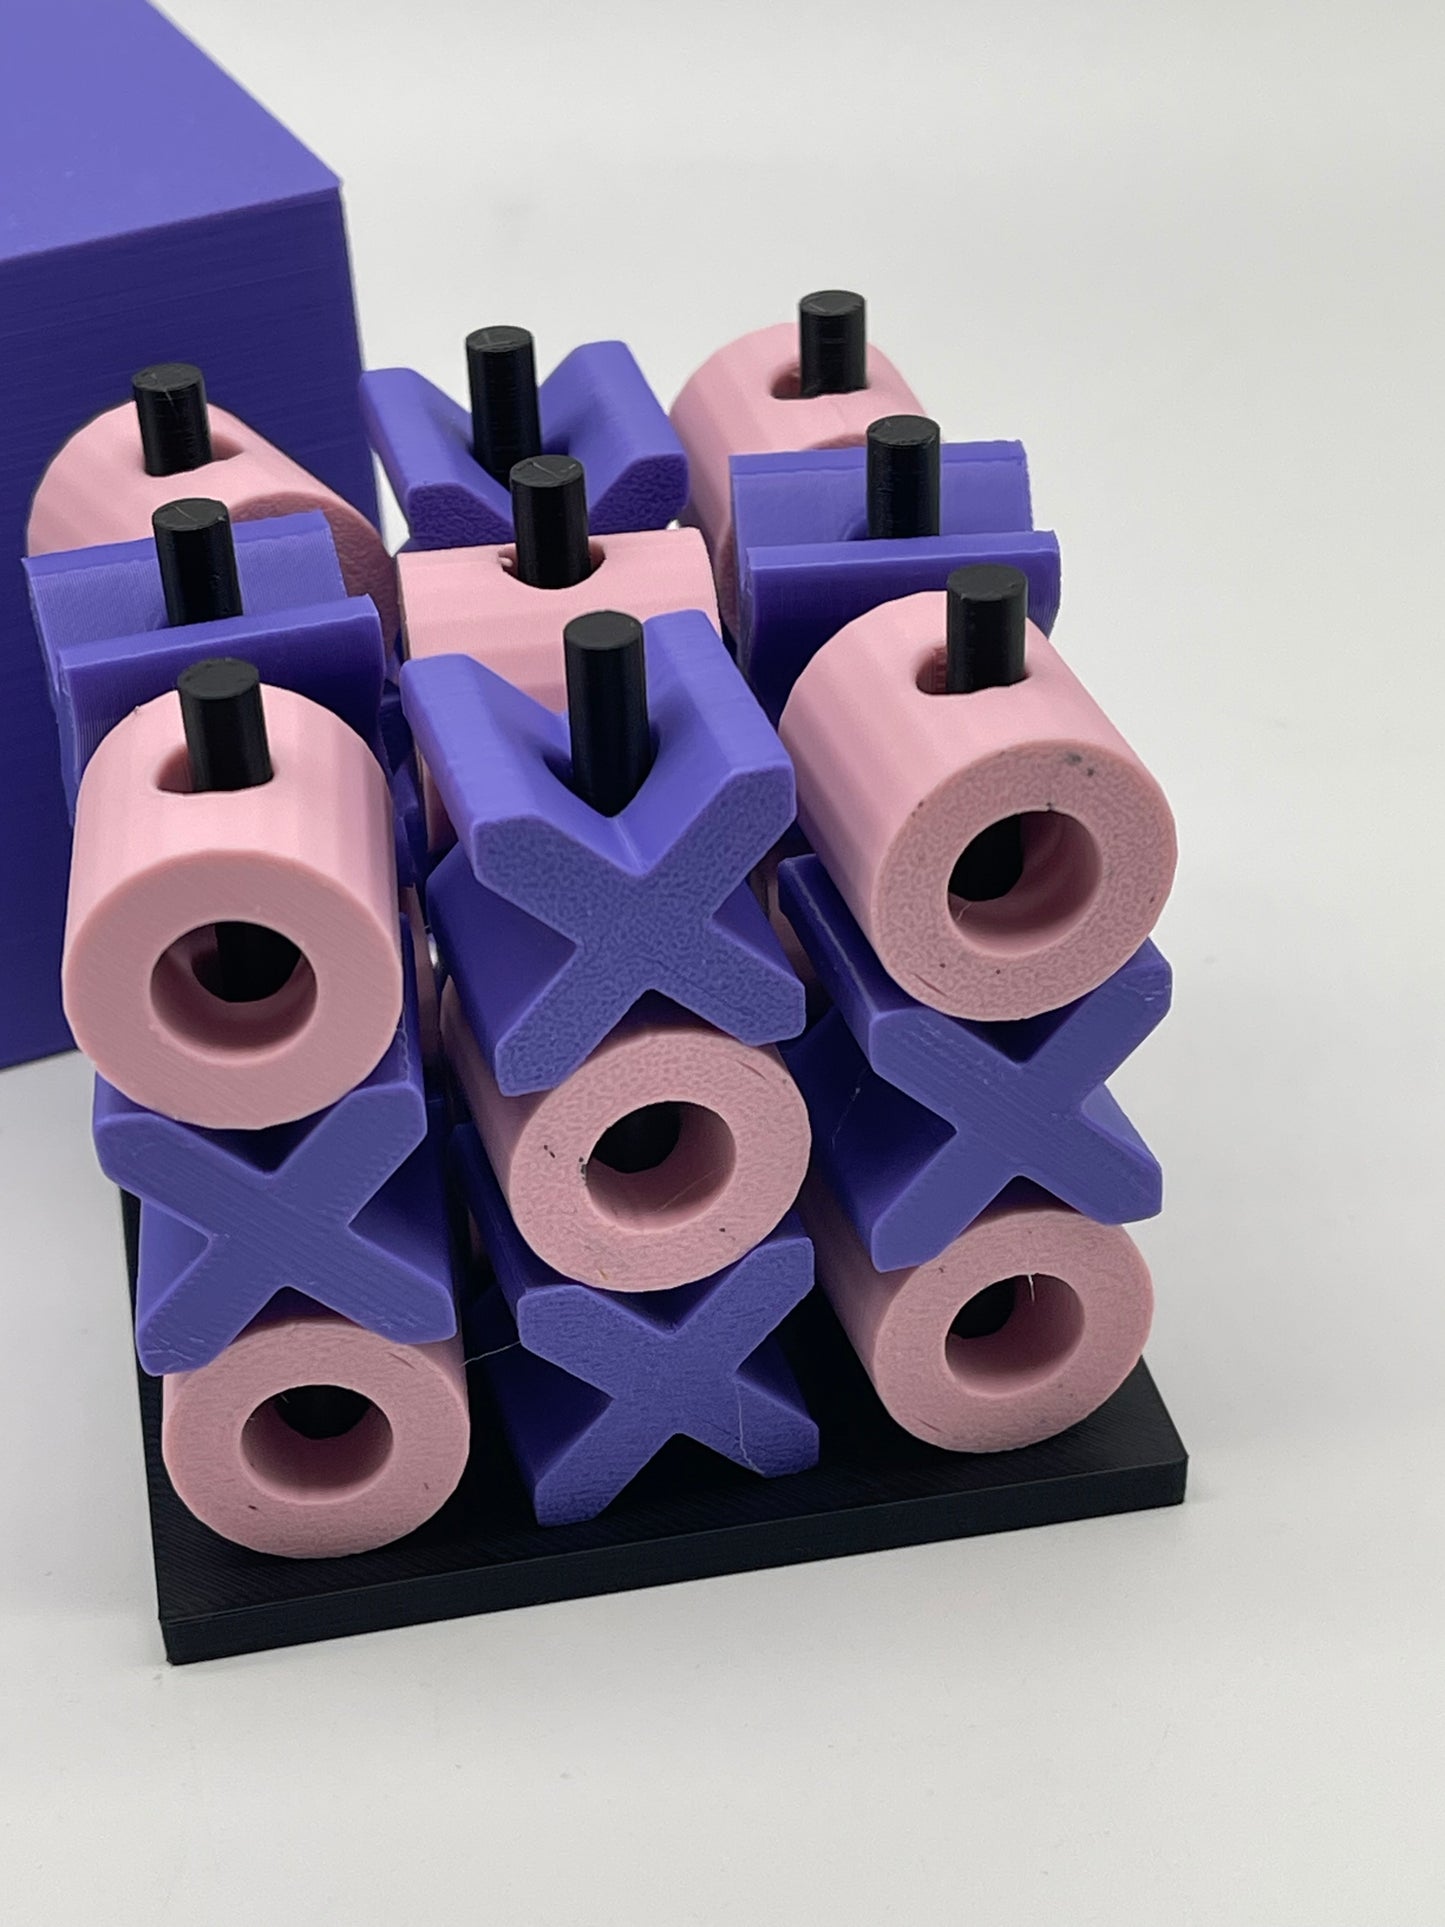 3d Tic-Tac-Toe Game - Pink and Purple